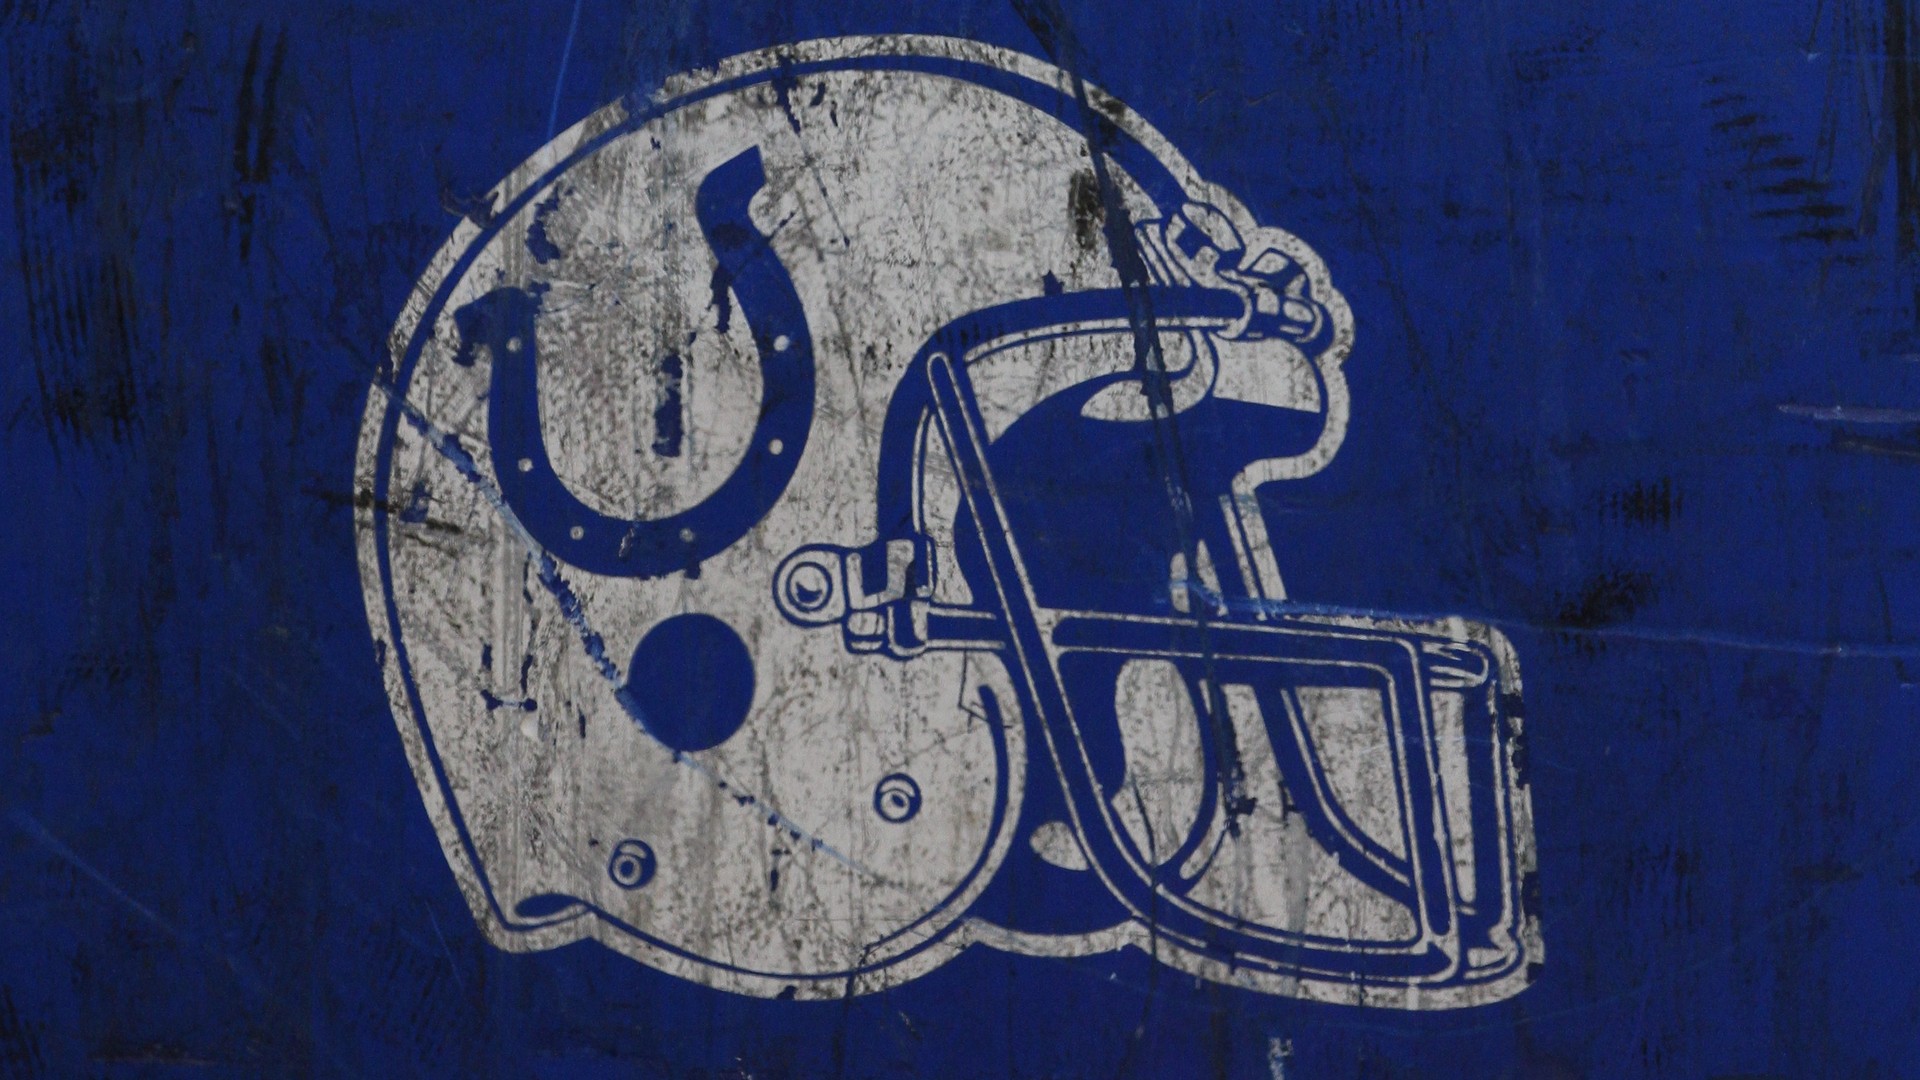 HD Desktop Wallpaper Indianapolis Colts NFL With Resolution 1920X1080 pixel. You can make this wallpaper for your Mac or Windows Desktop Background, iPhone, Android or Tablet and another Smartphone device for free